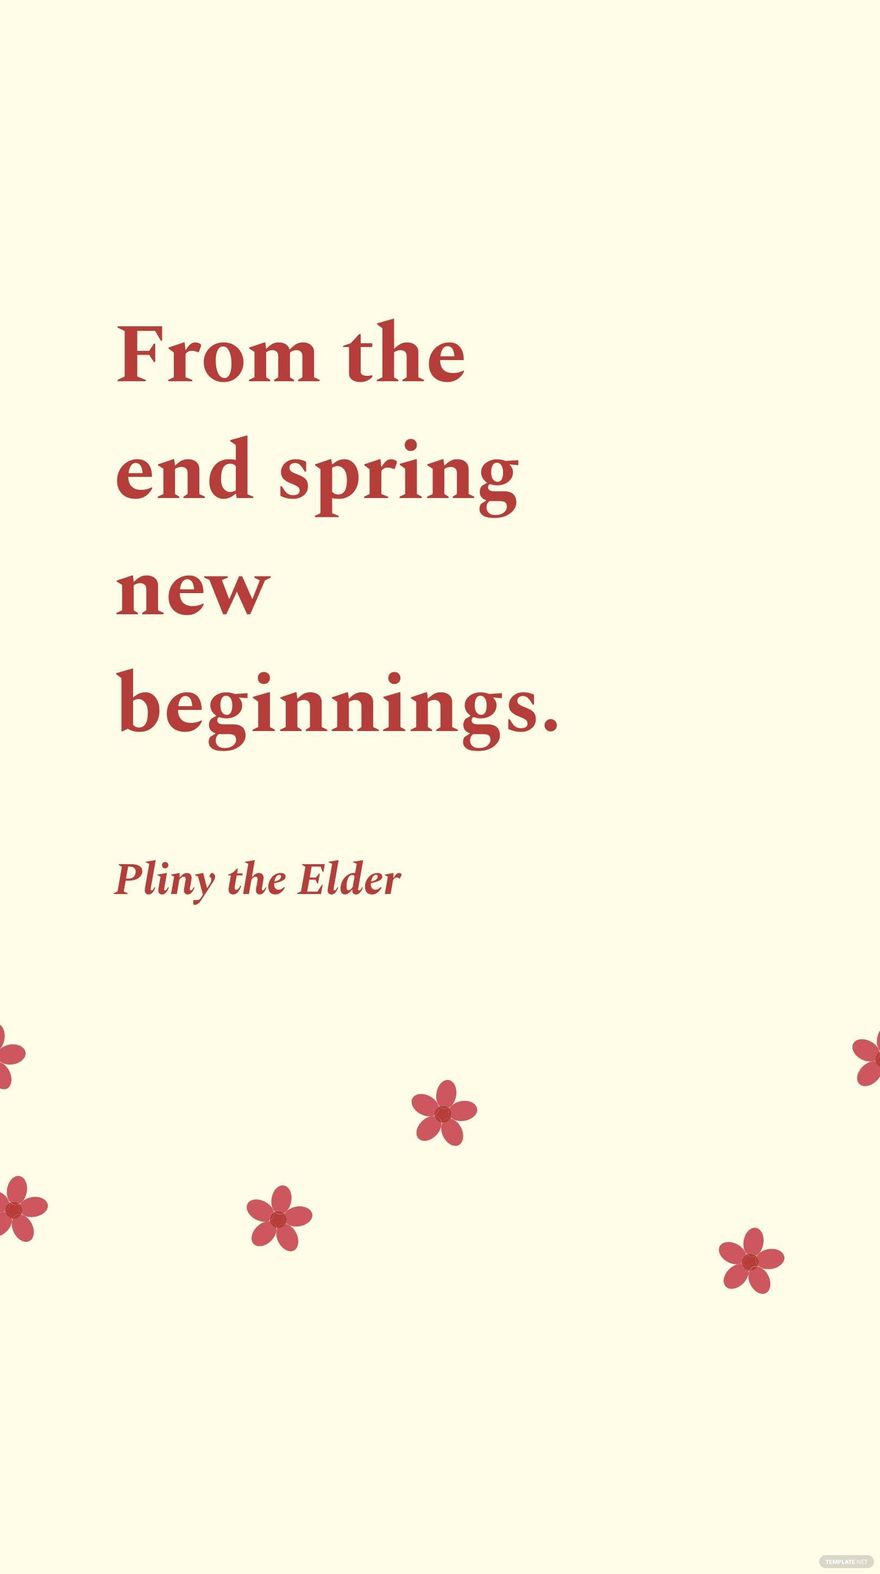 Free Pliny the Elder - From the end spring new beginnings. in JPG